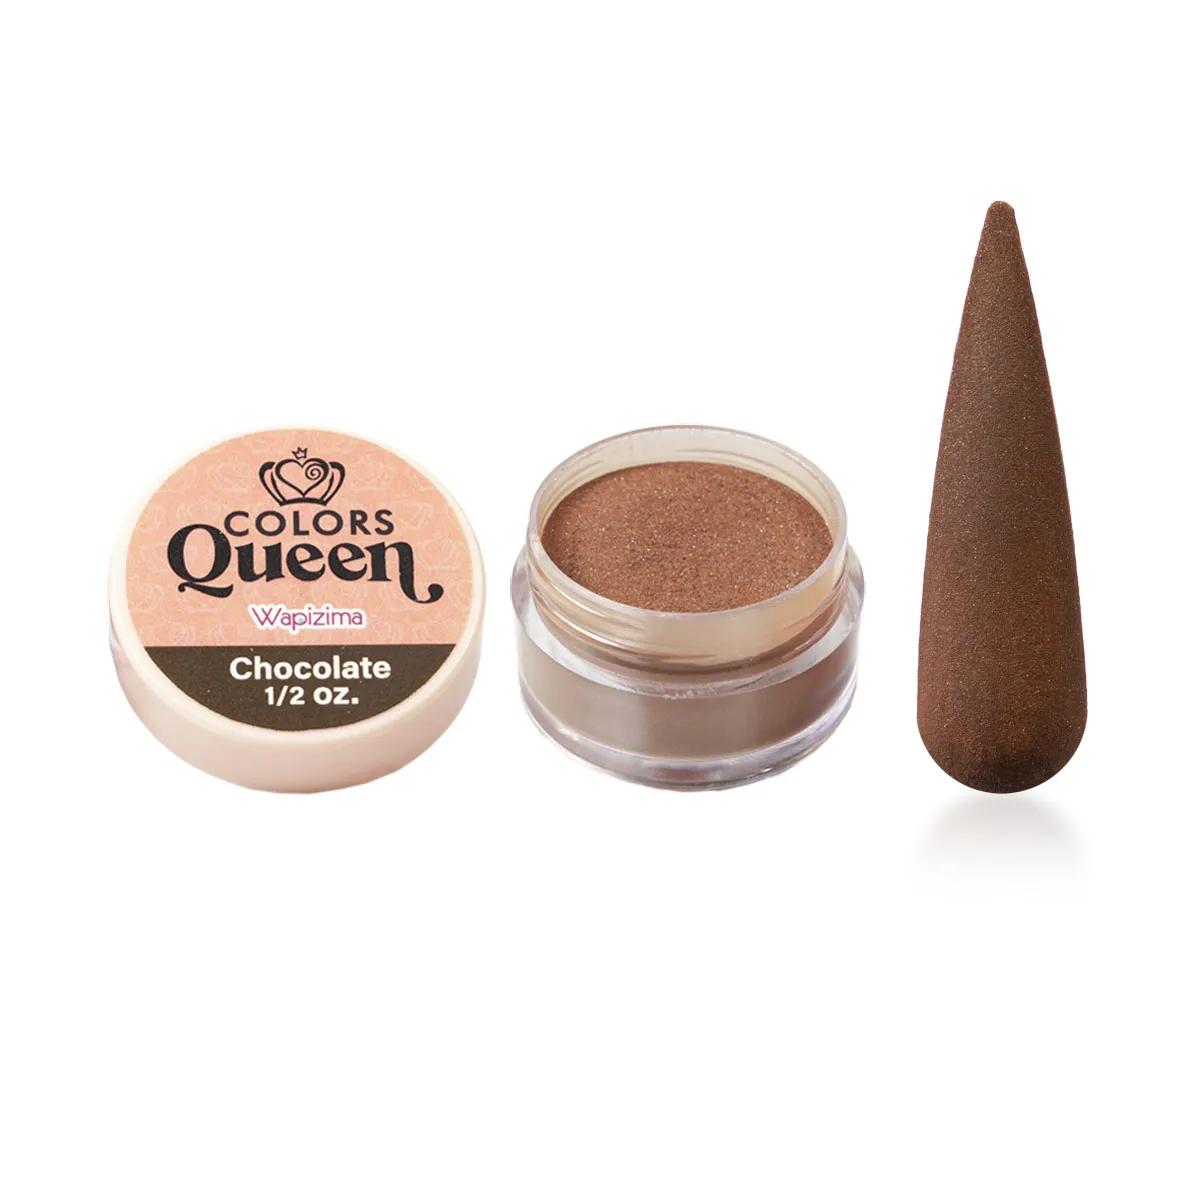 W.Colors Queen Chocolate 1/2 Oz